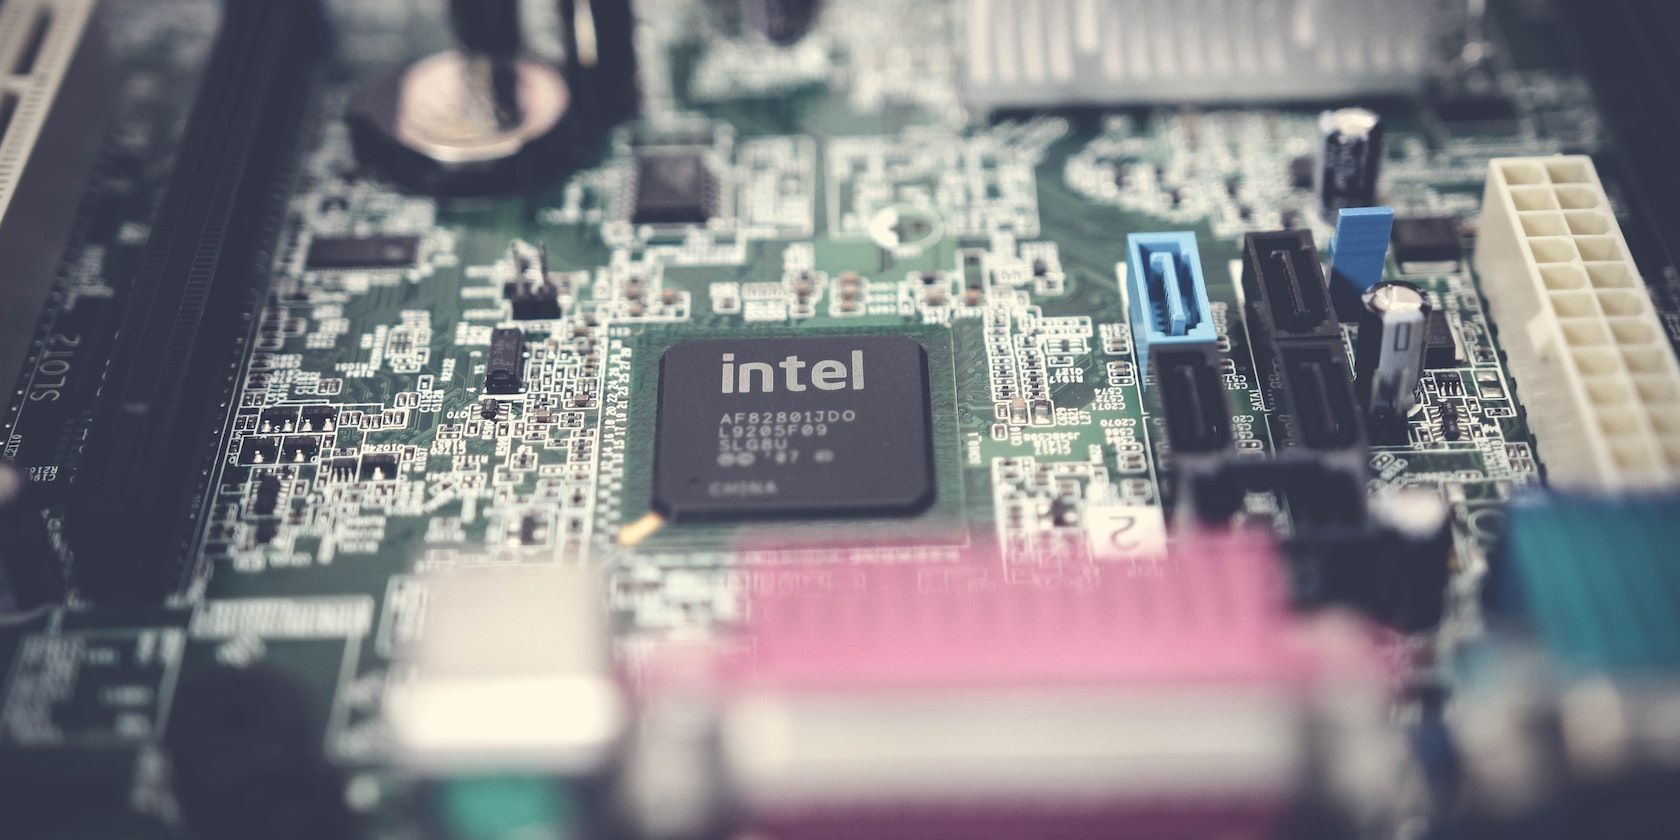 Computer motherboard showing Intel chip